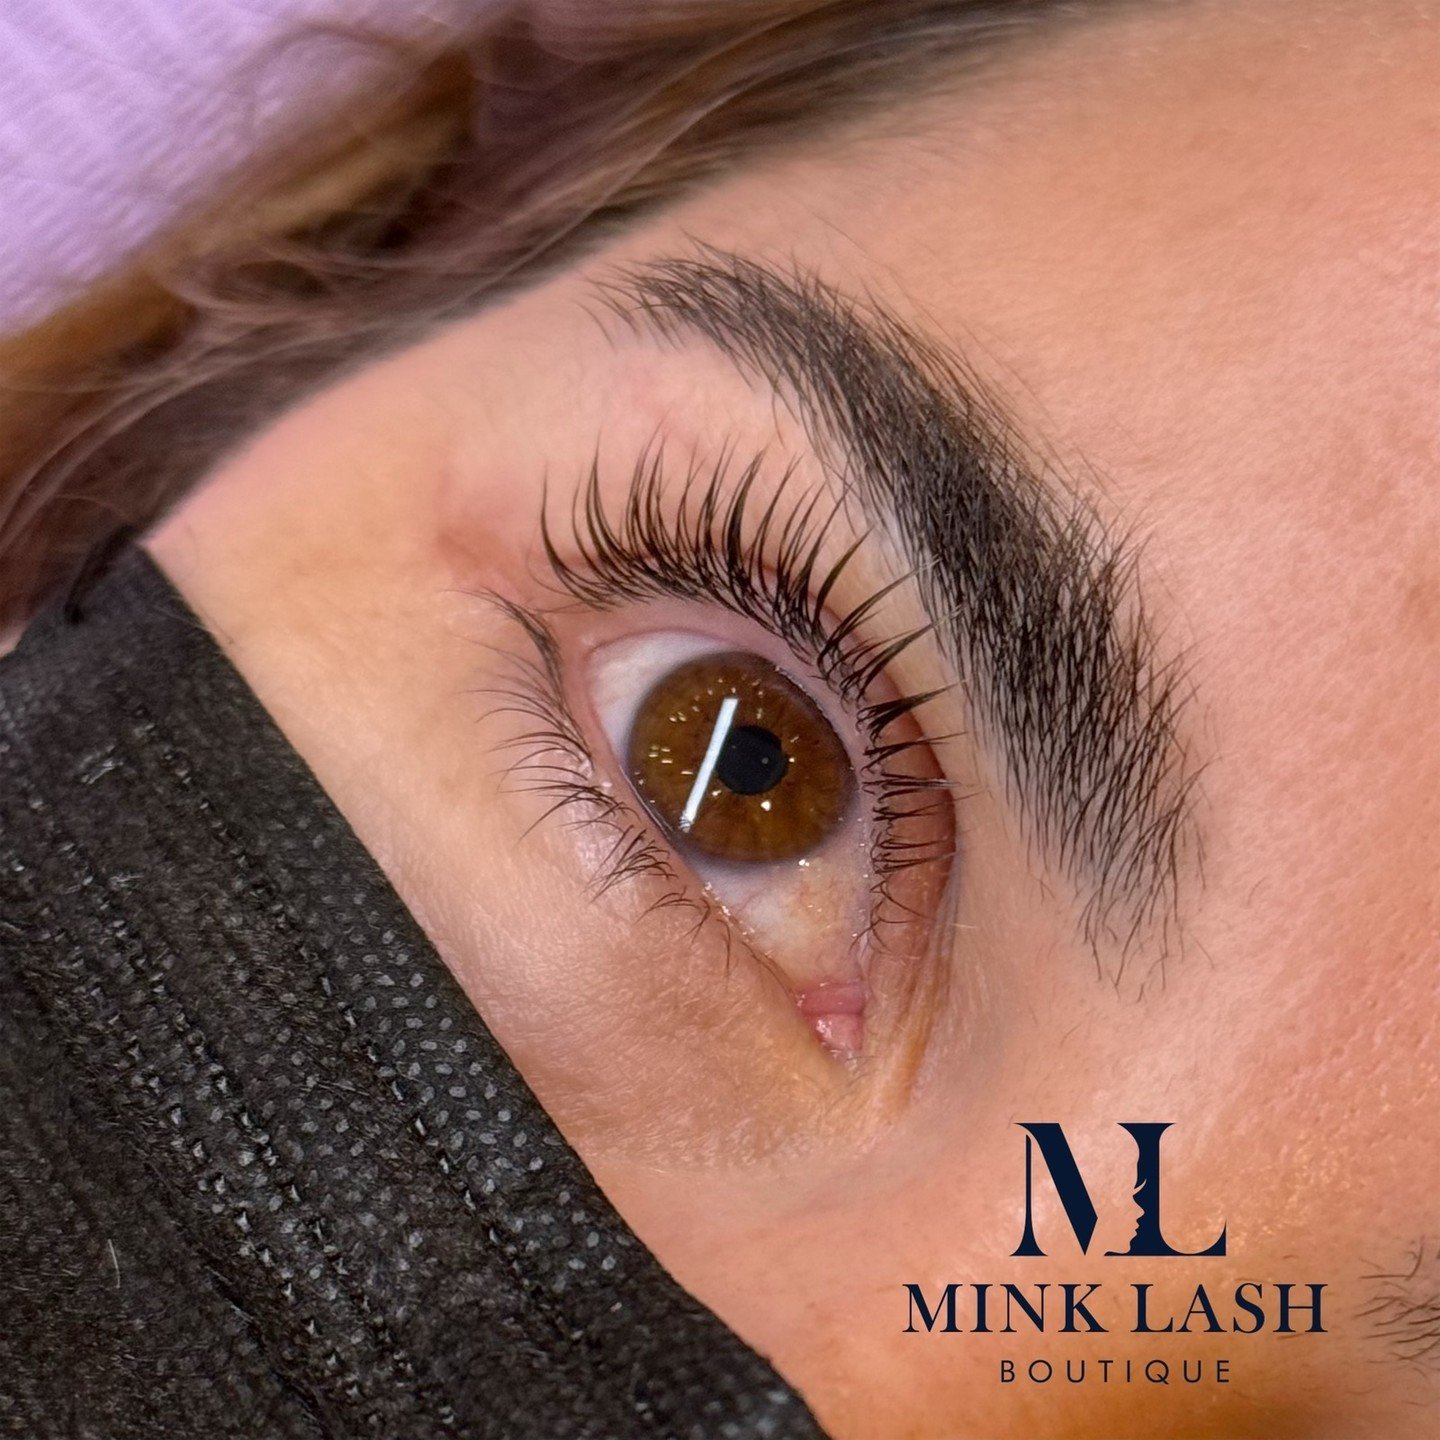 L Curl Lash Lift on this gorgeous client! 

No mascara, No extensions just her lifted lashes 😍
Talk about blessed 

Book your Lash Lift today - now booking at both the Burrard location and the Yaletown location 

 #lashlift #lashes #beauty #lasharti